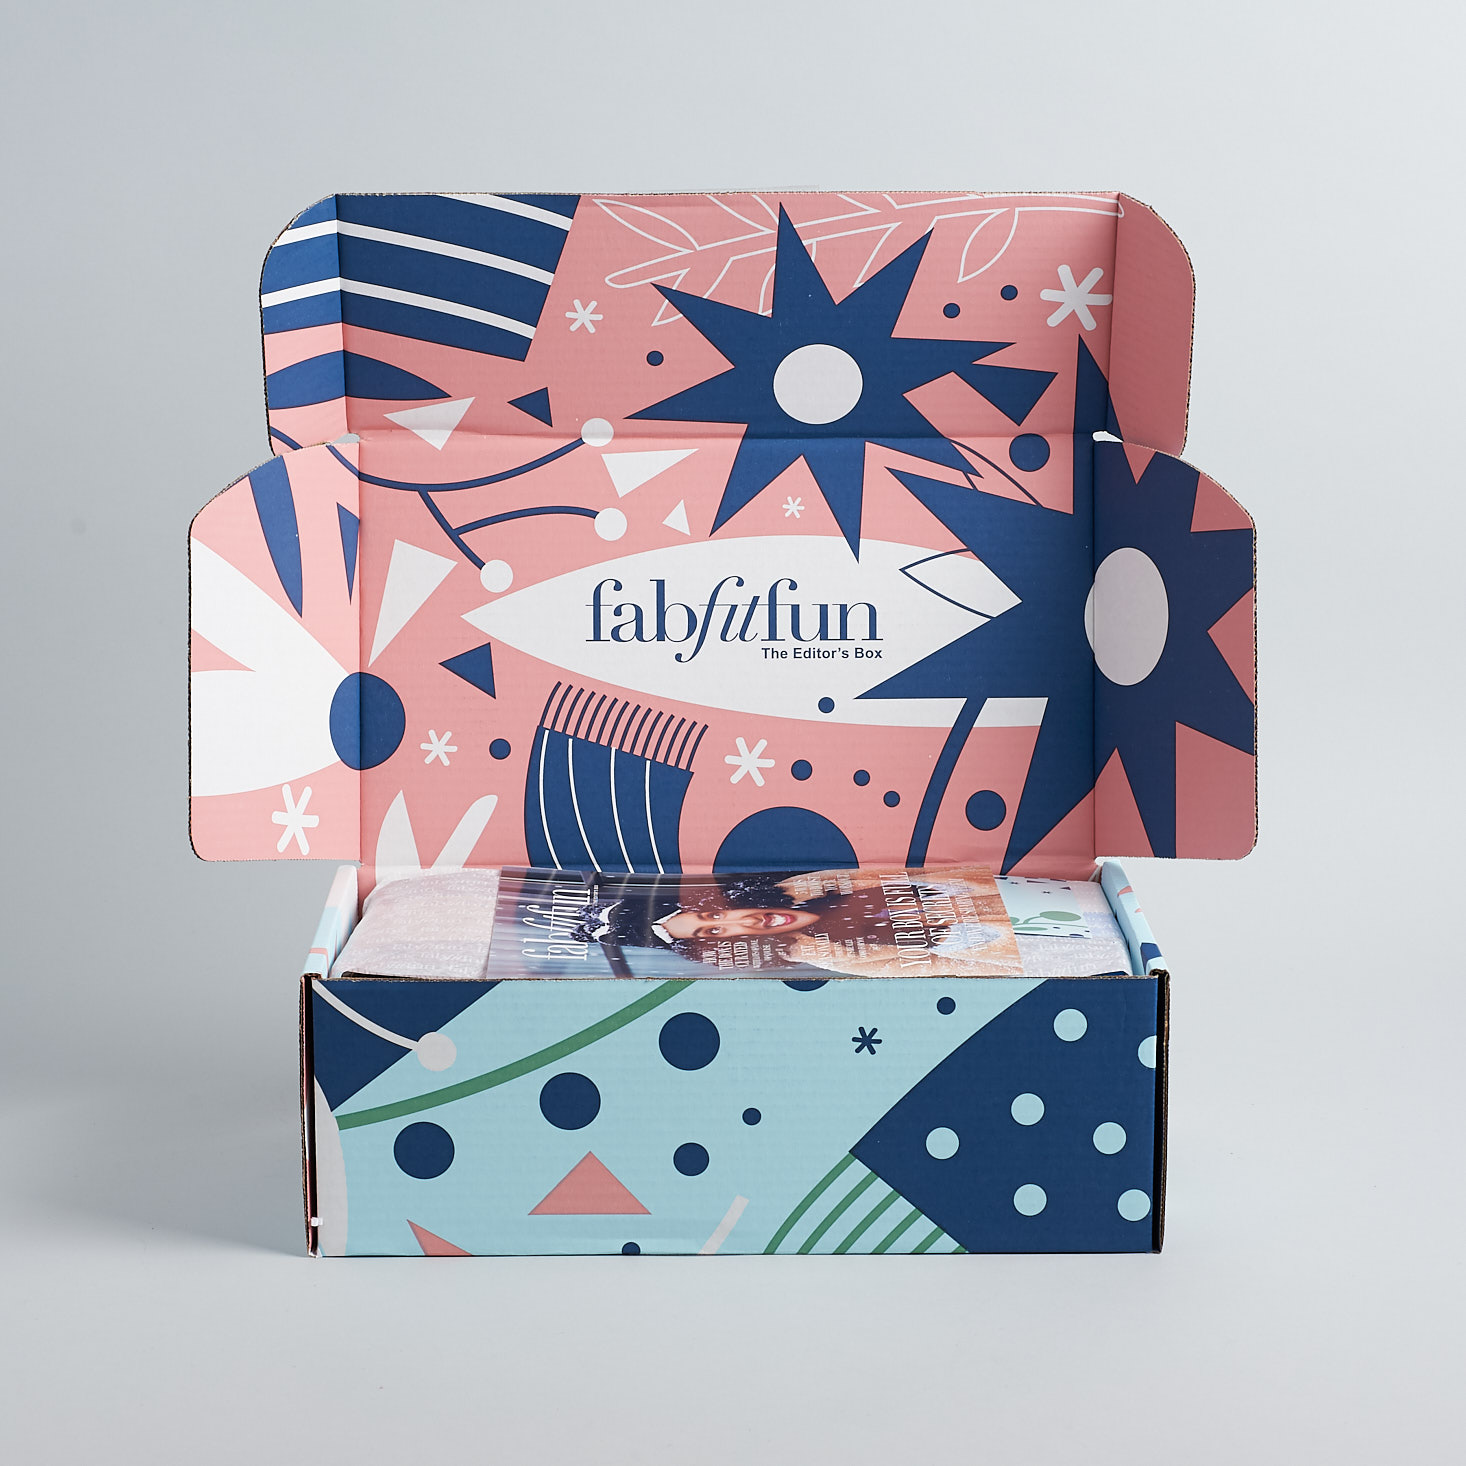 The Best Boxes for Subscription Box Newbies – 2019 Readers’ Choice